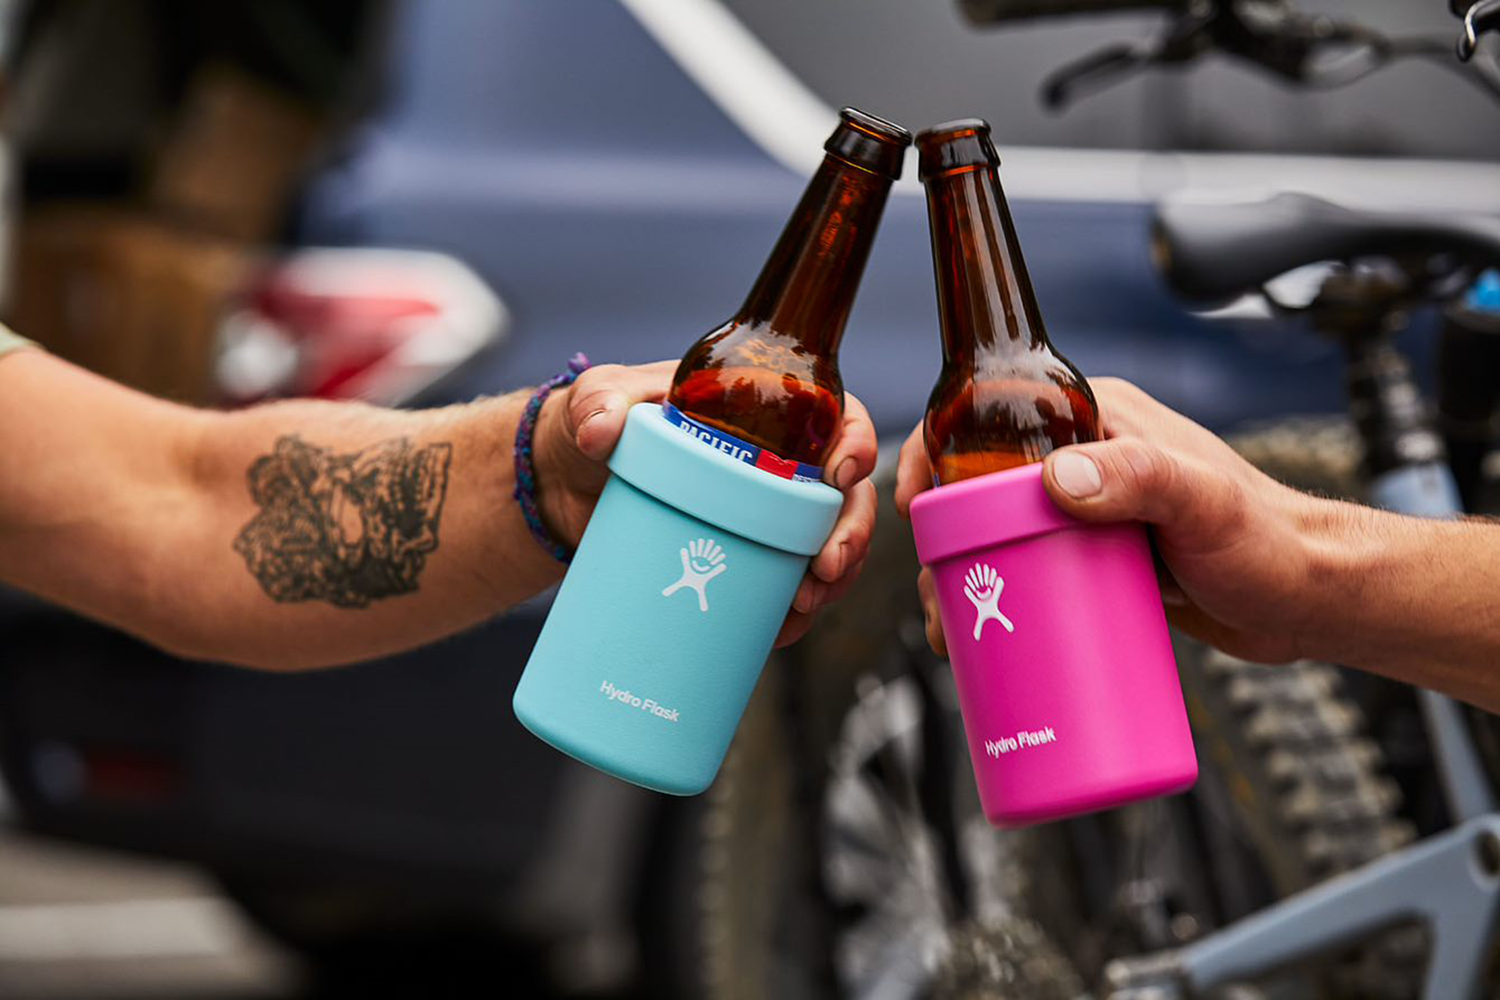 Hydro Flask Introduces New Coffee and Drinkware Offerings